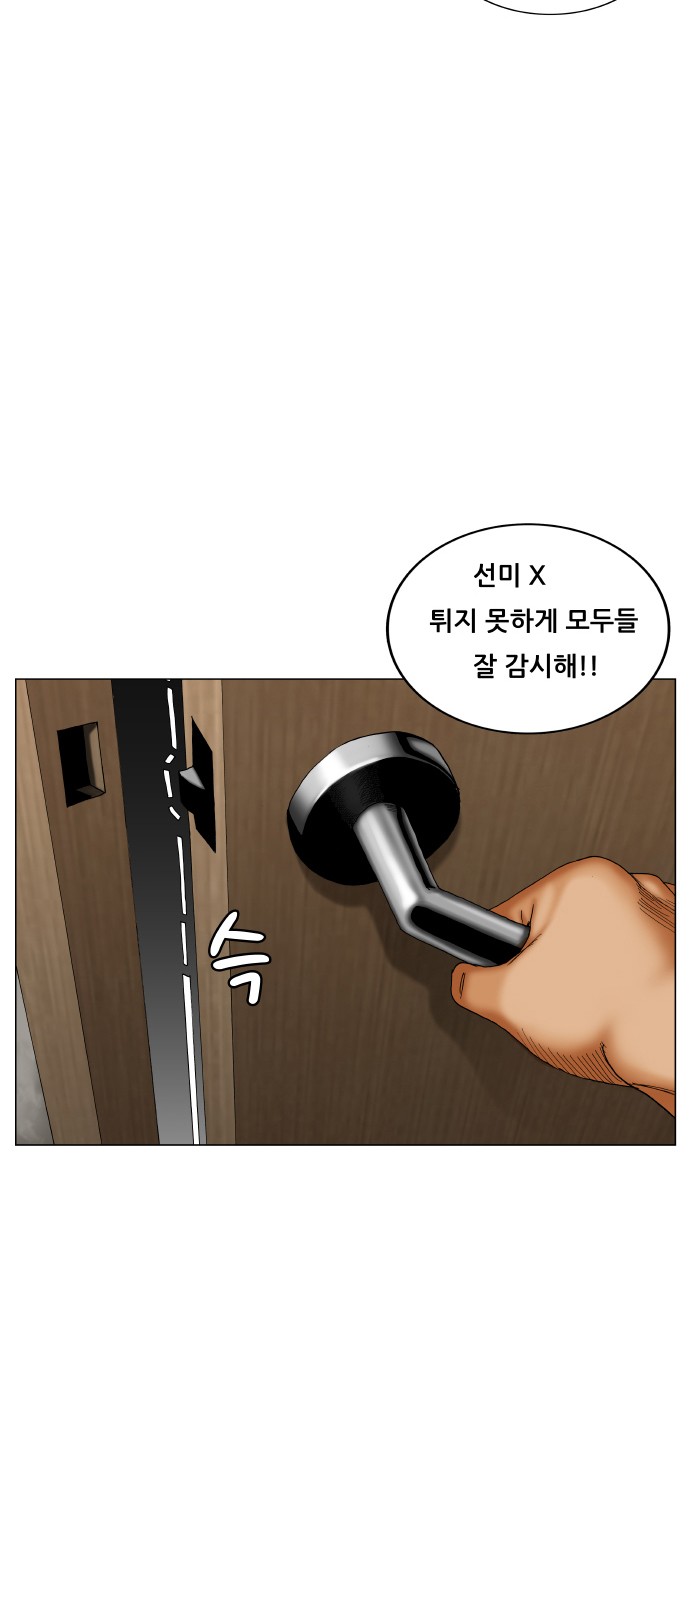 Ultimate Legend - Kang Hae Hyo - Chapter 412 - Page 2